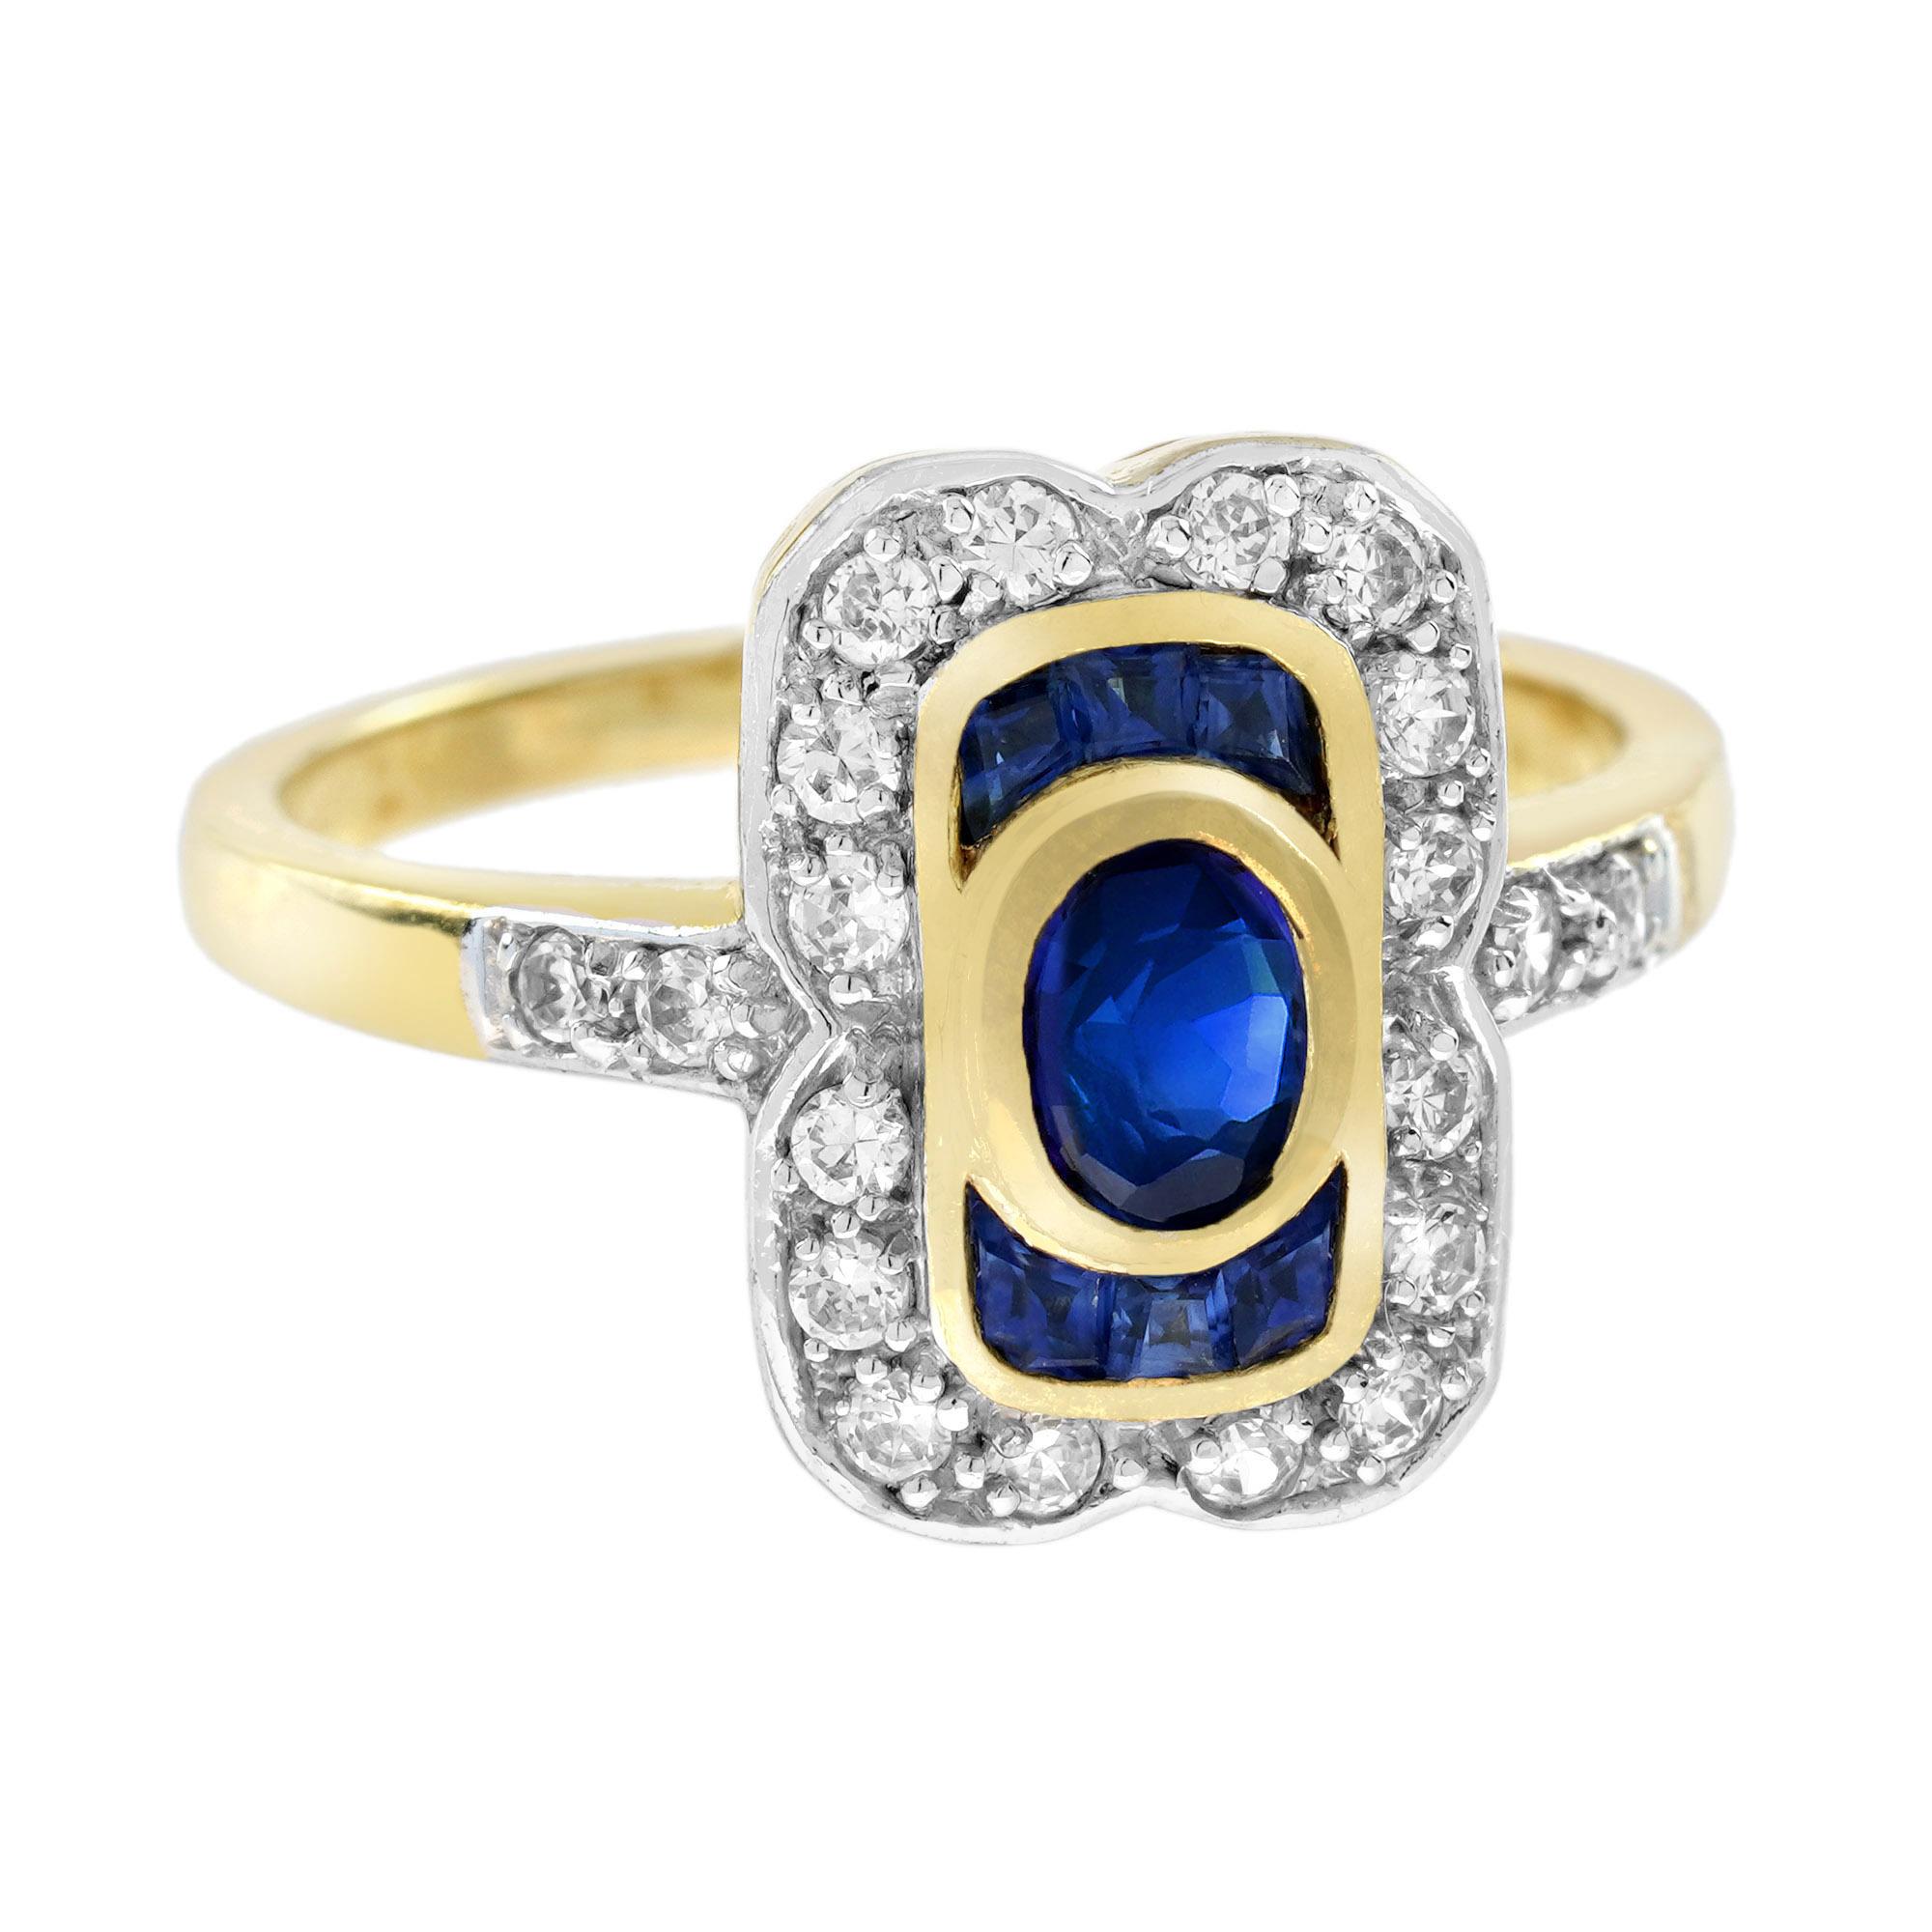 For Sale:  Oval Blue Sapphire and Diamond Art Deco Style Engagement Ring in 14K Gold 3